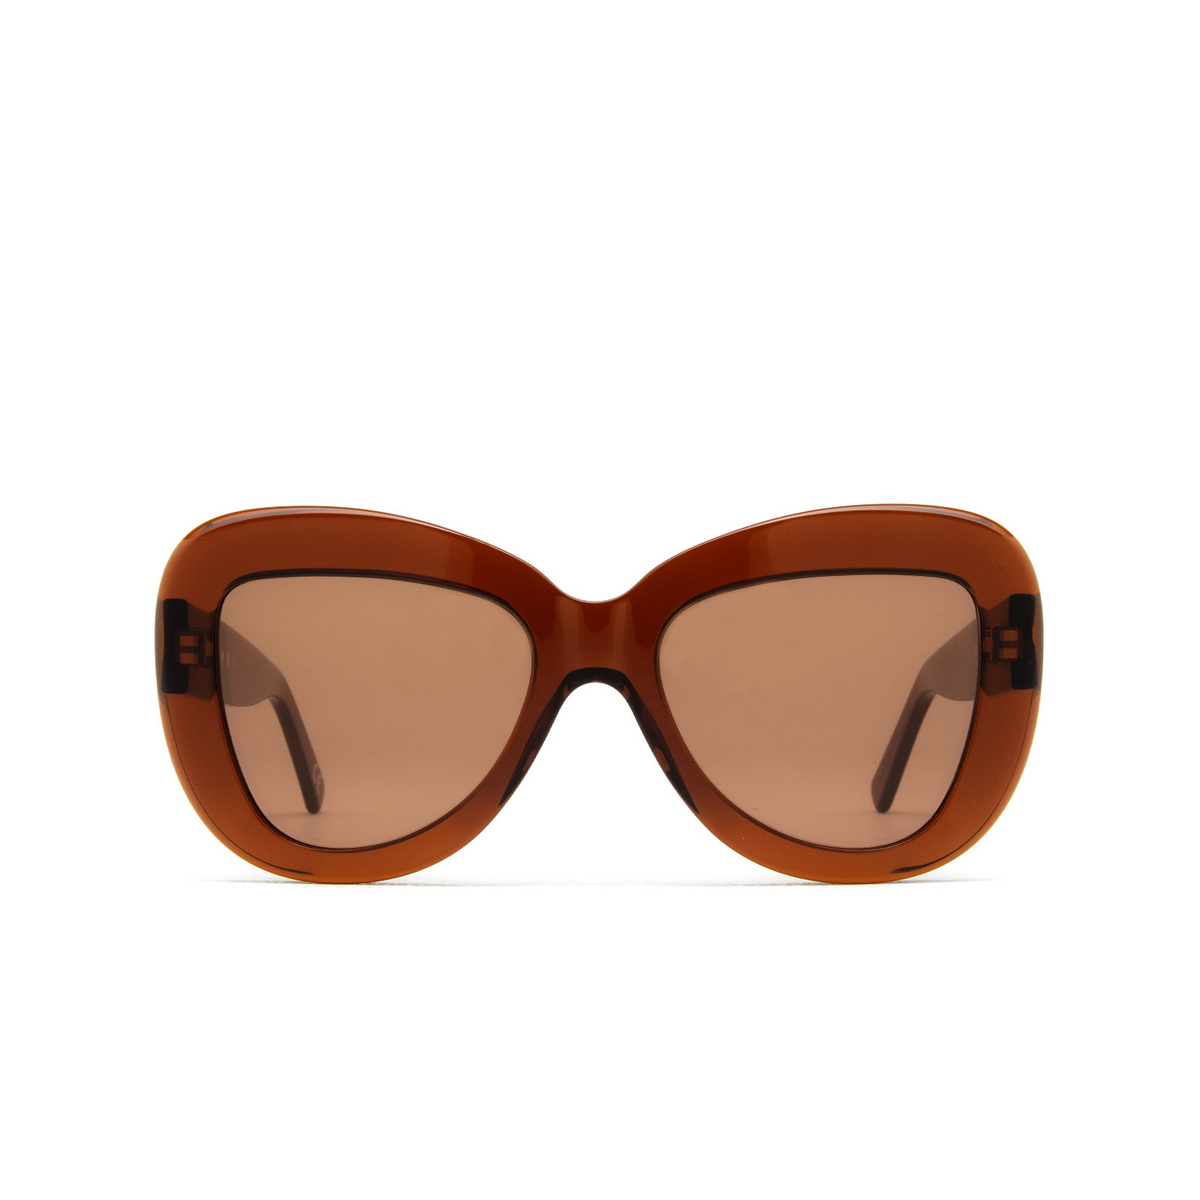 Marni® Butterfly Sunglasses: Elephant Island color Crystal Bordeaux Mgz - front view.